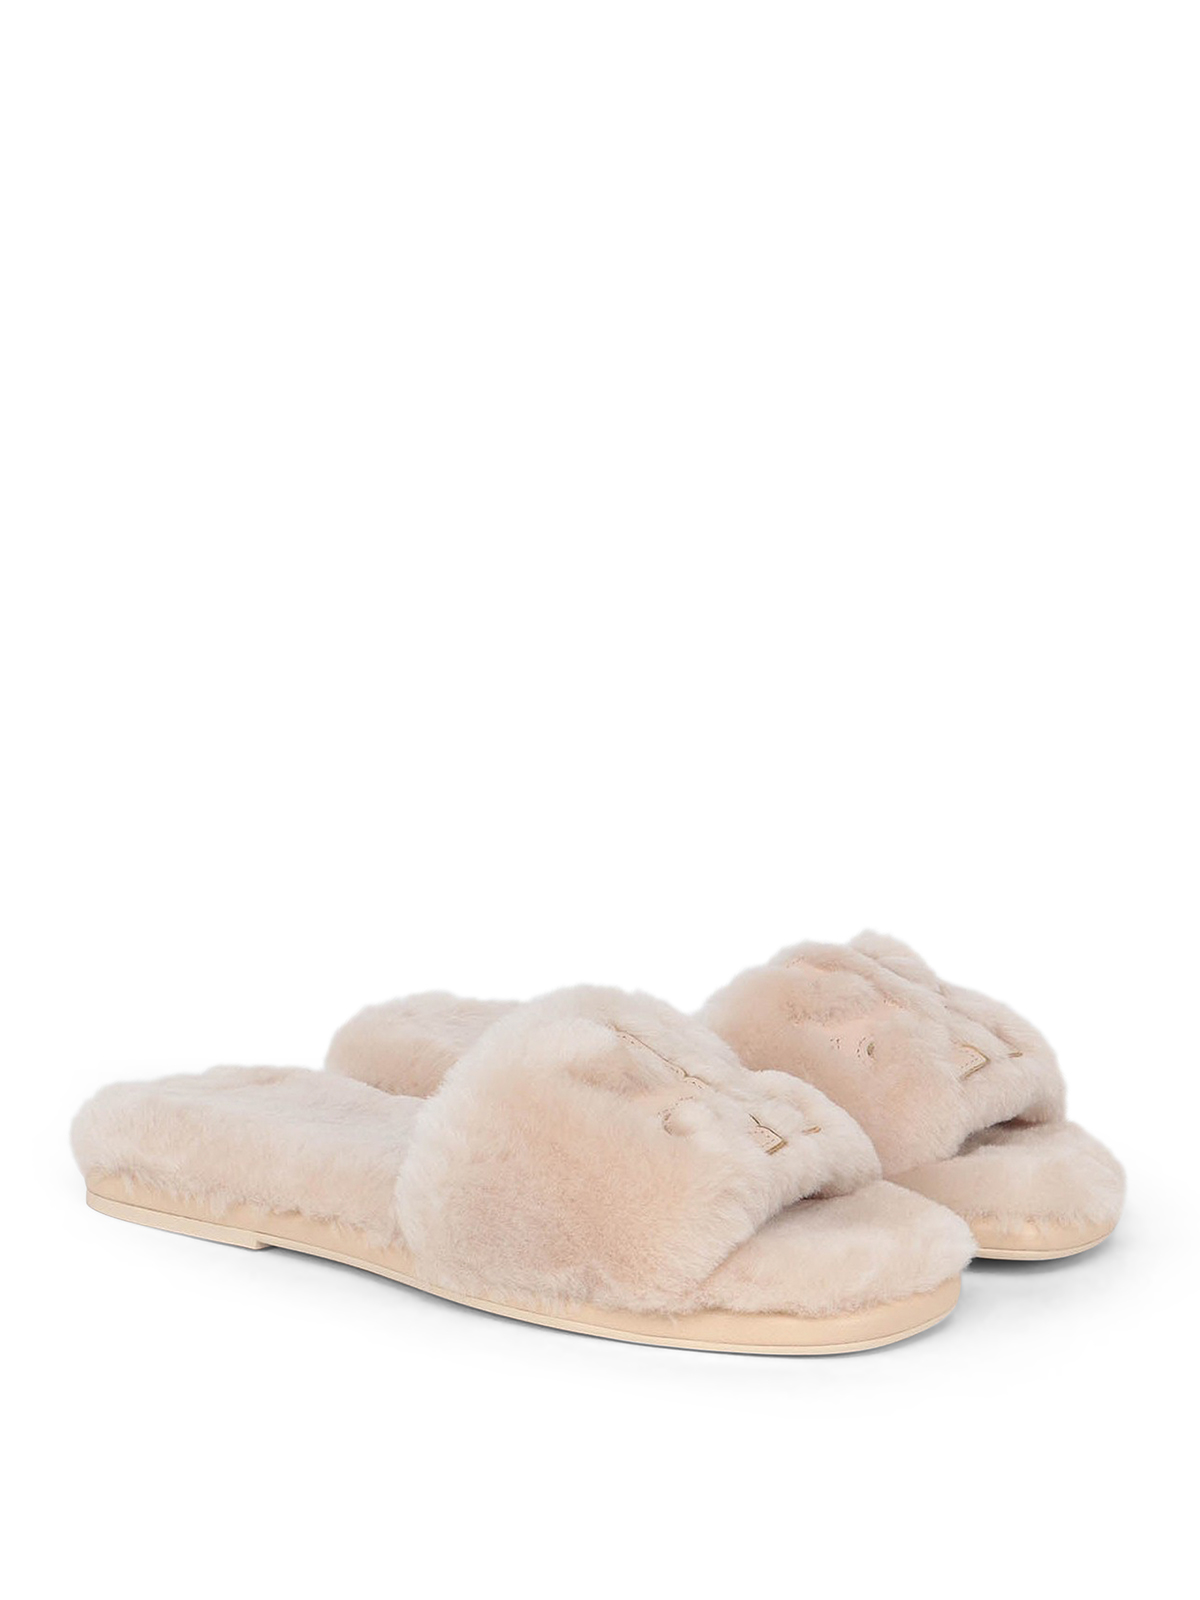 Sandals Tory Burch - Double T shearling slides - 83484100 